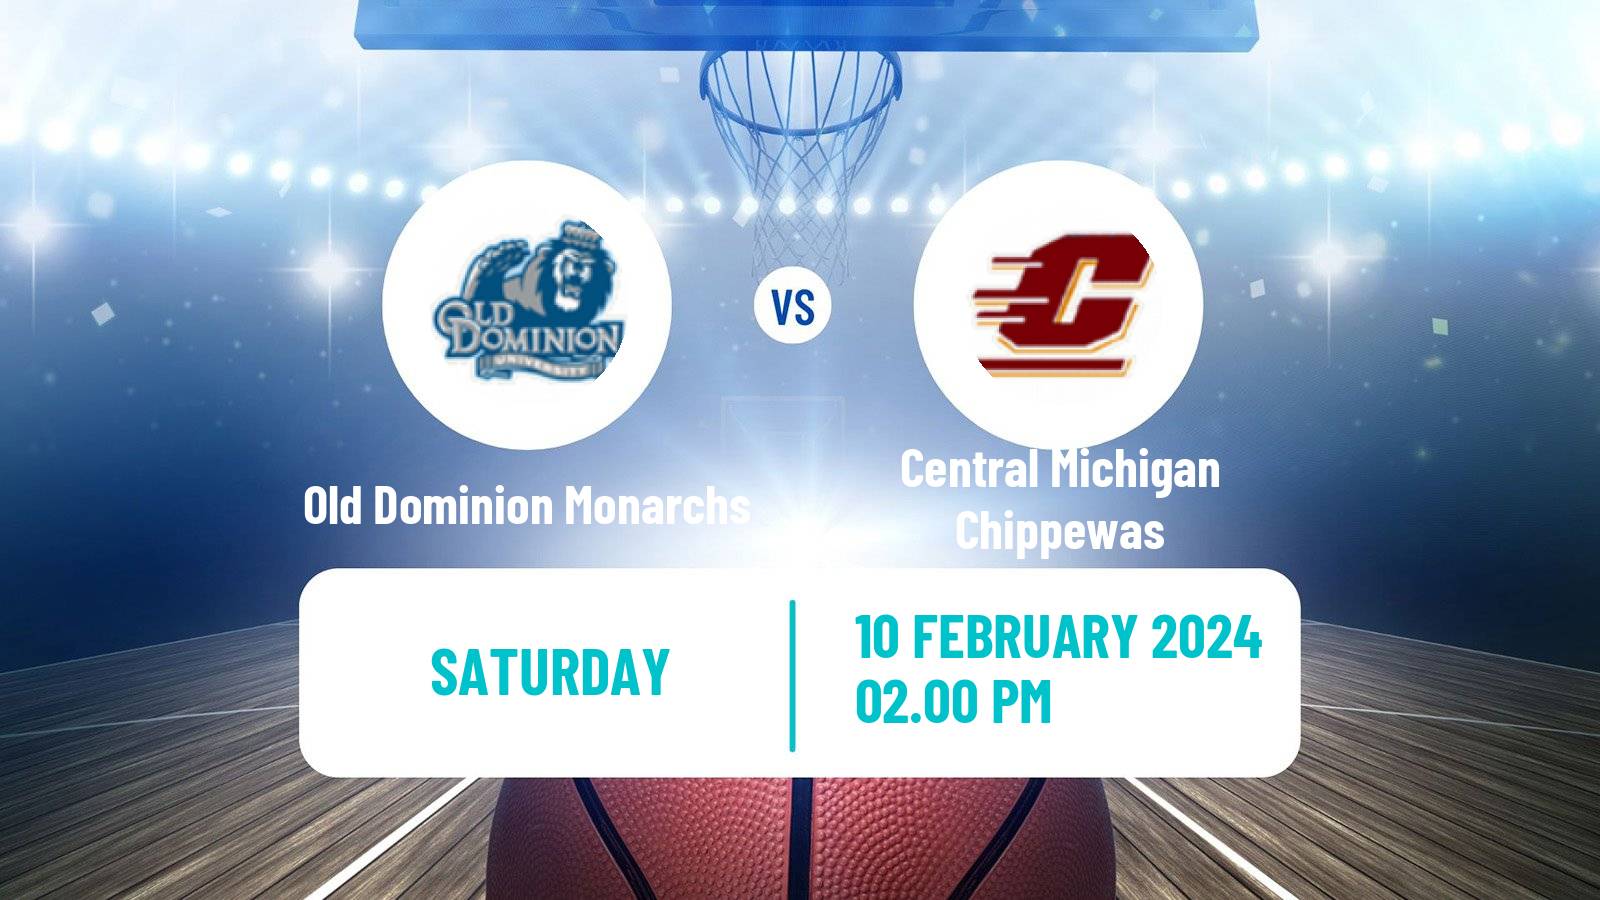 Basketball NCAA College Basketball Old Dominion Monarchs - Central Michigan Chippewas